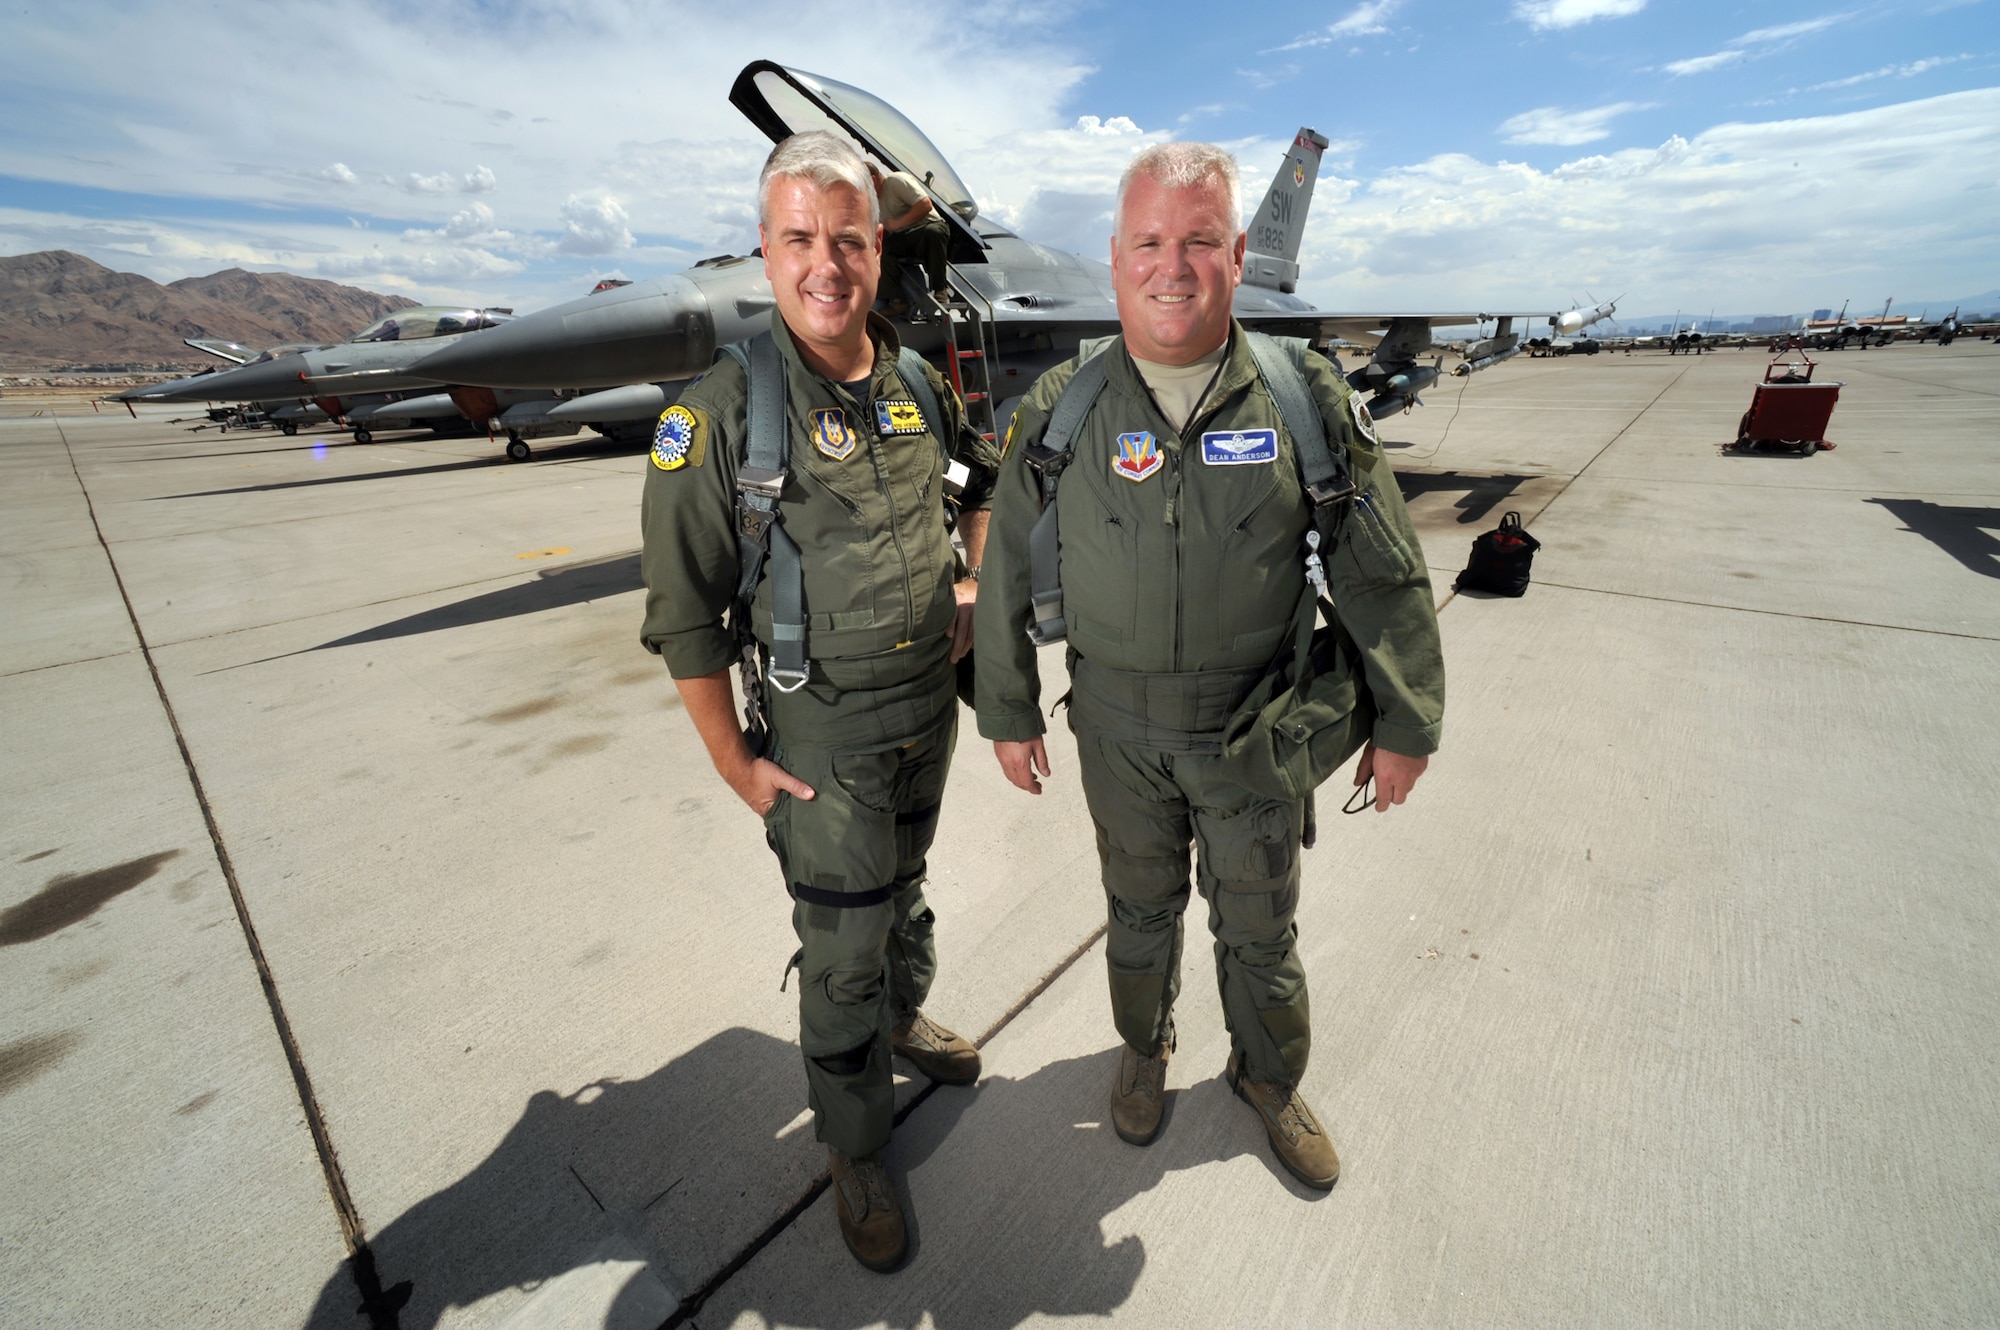 Colonel Dean "Norm" Anderson, 20th Fighter Wing vice commander at Shaw Air Force Base, S.C., and his younger brother,  Lt. Col. Ross "Rosco" Anderson, 482nd FW Operations Group commander and full-time reservist at Homestead Air Reserve Base in Homestead, Fla. Pose for a portrait on the Nellis AFB, Nev., flight line to signify the first time two brothers have been in command together at a Red Flag exercise.  The brothers were given the unique opportunity to take command of the Air Expeditionary Wing at the Red Flag 09-4 exercise in Las Vegas. Col. Anderson, serving as the Red Flag AEW commander and Lt. Col. Anderson, as the Red Flag AEW Operations Group commander.  "It's a huge honor, and a very big deal to me to be able to do this with my brother in a leadership position," said Lt. Col. Anderson. "Flying side by side in a squadron is one thing, but commanding is a huge honor." (U.S. Air Force photo/Tech. Sgt. Michael R. Holzworth)
